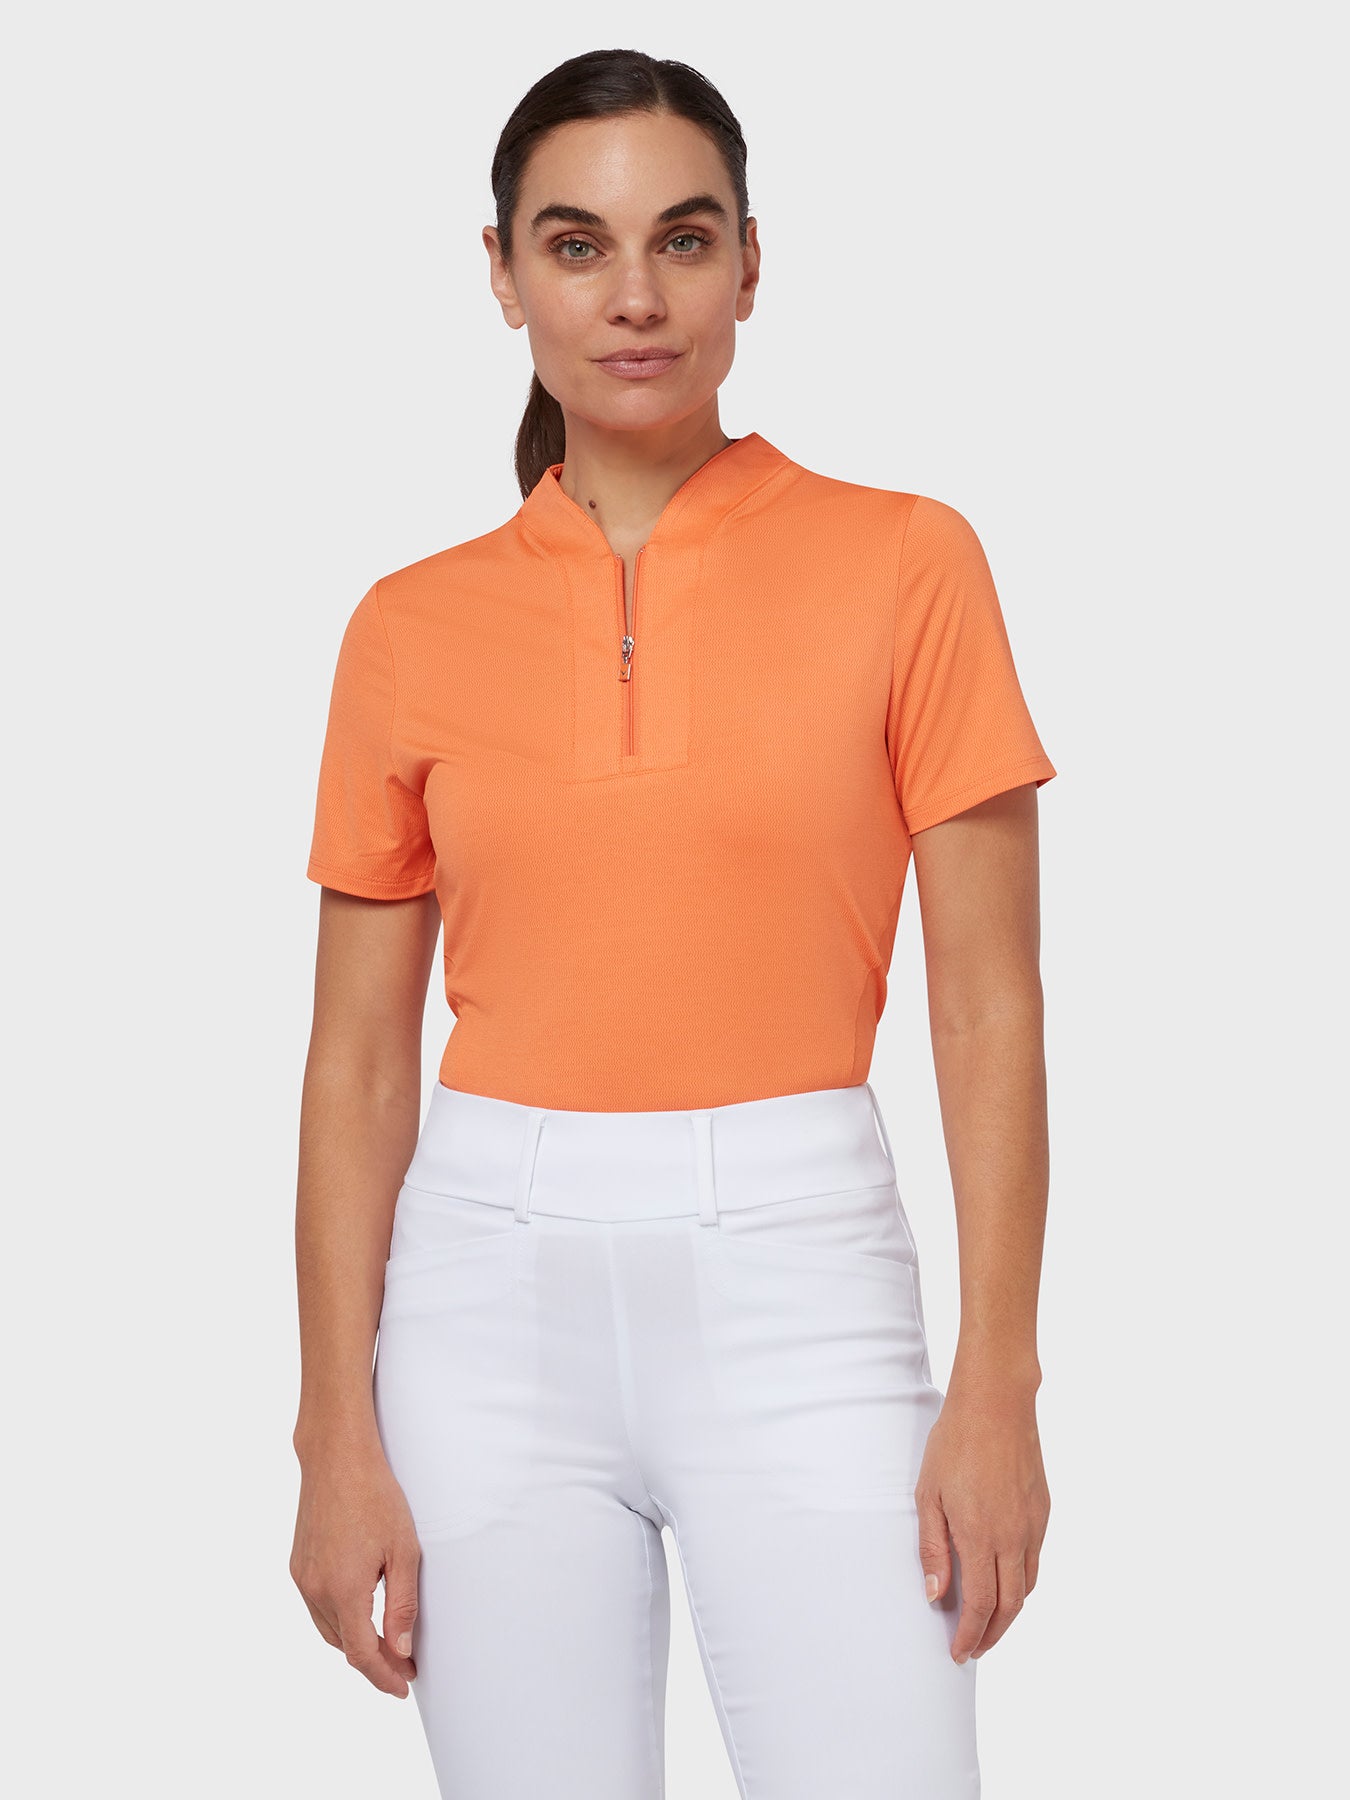 View Tonal Texture Heather Polo Top In Nectarine Heather Nectarine Htr XS information